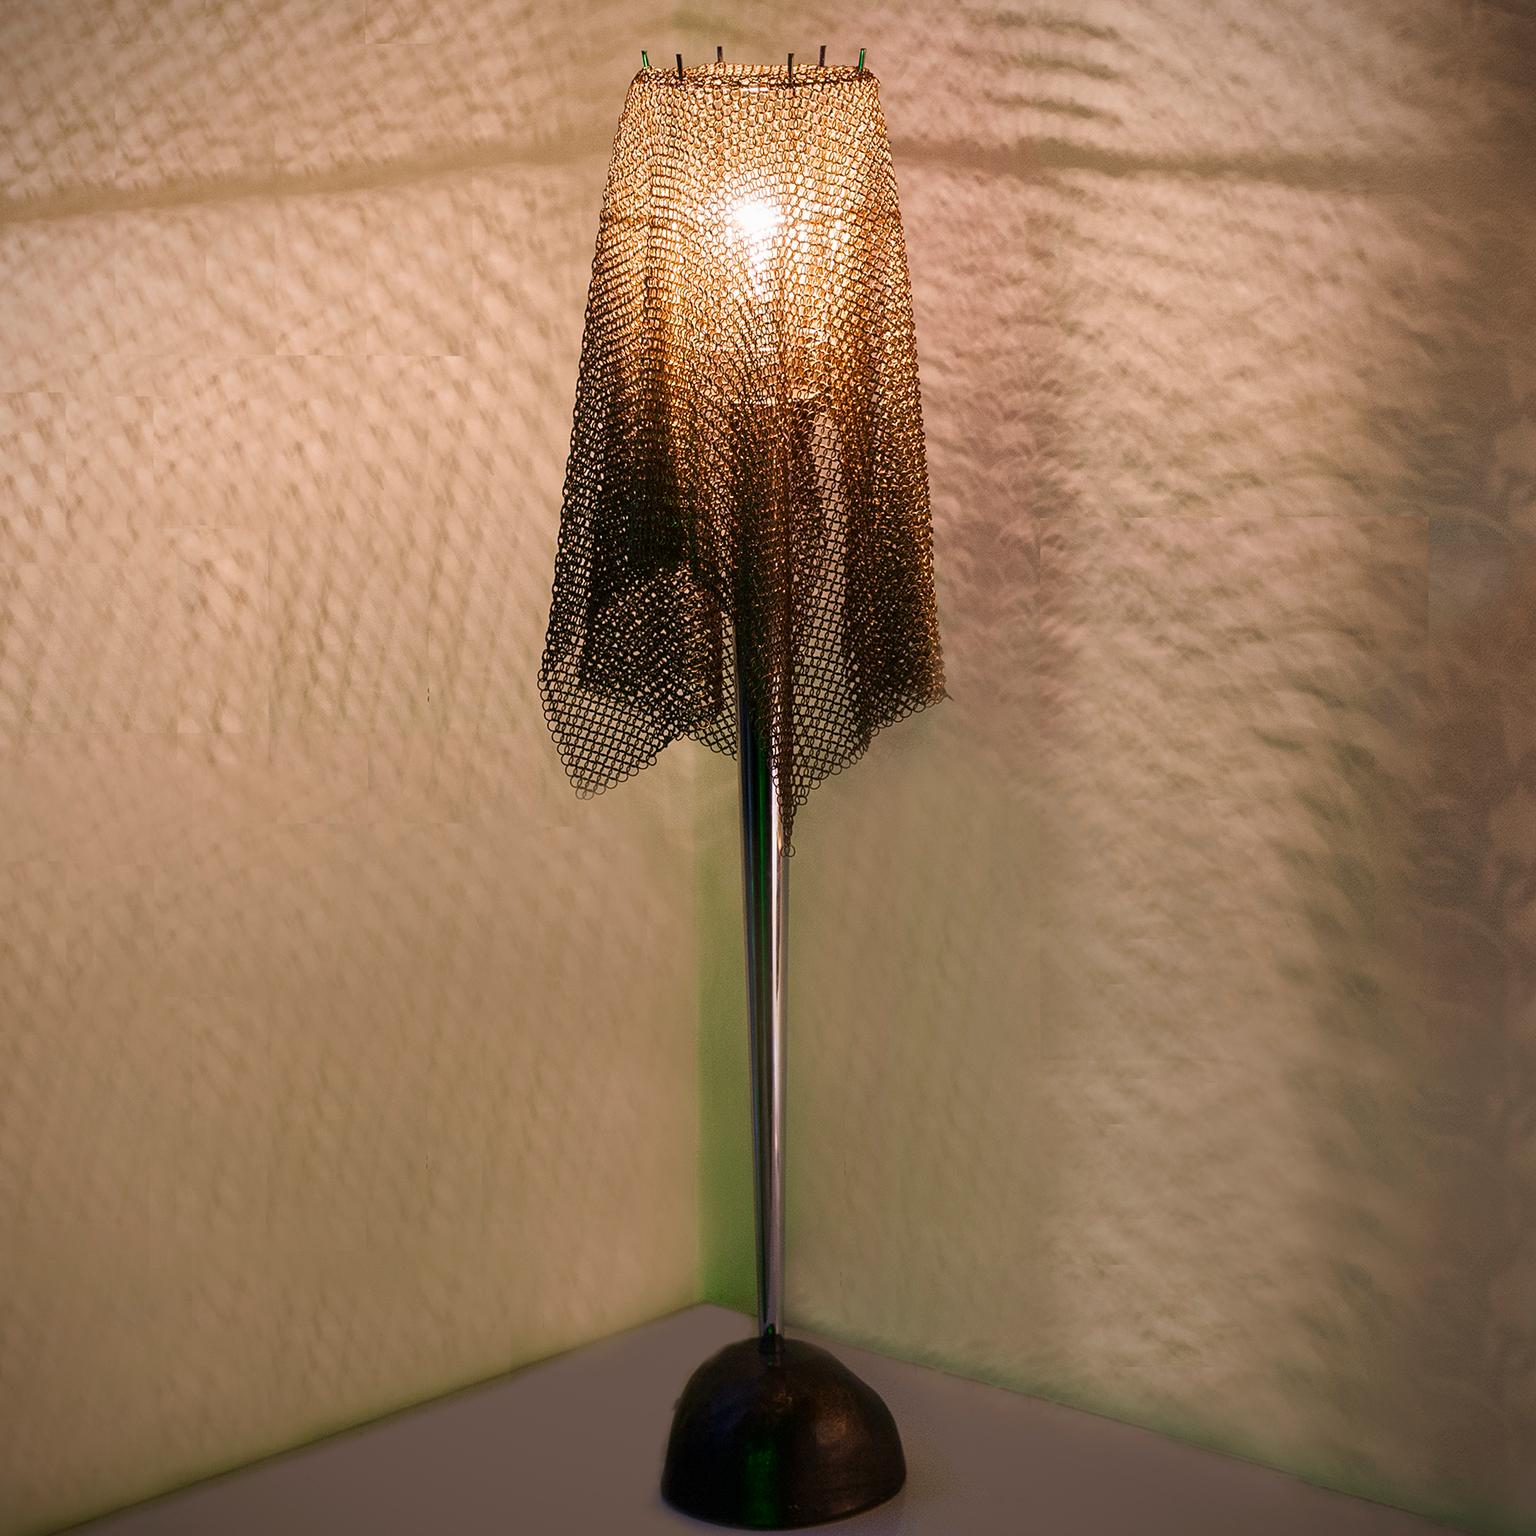 Brass Chain Mail Table Lamp “Ecate” by Toni Cordero for Artemide, 1990